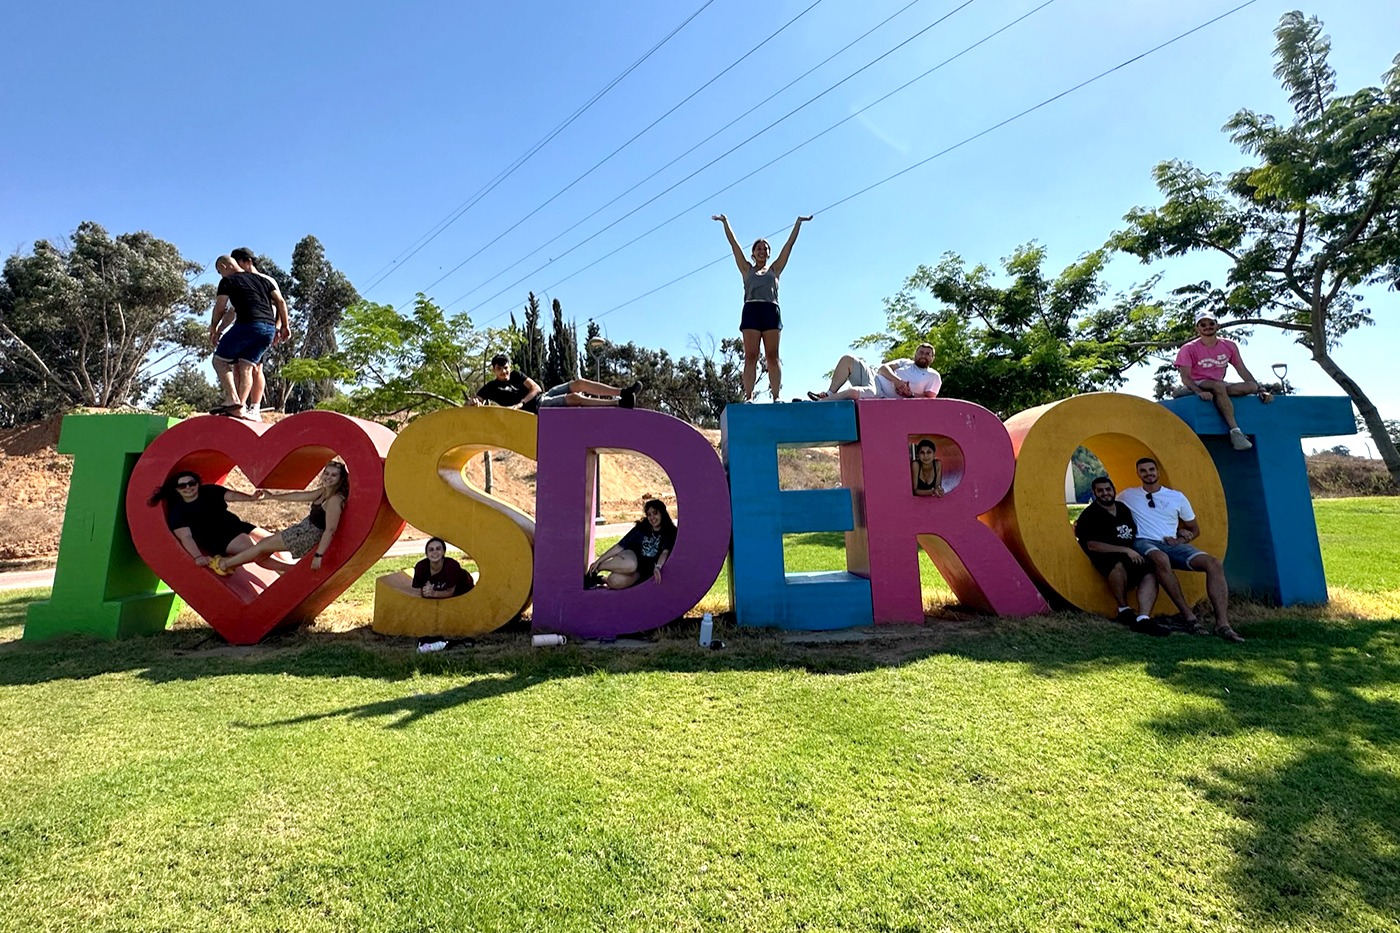 Students posing on giant letters that spell out I (heart symbol) SDEROT.